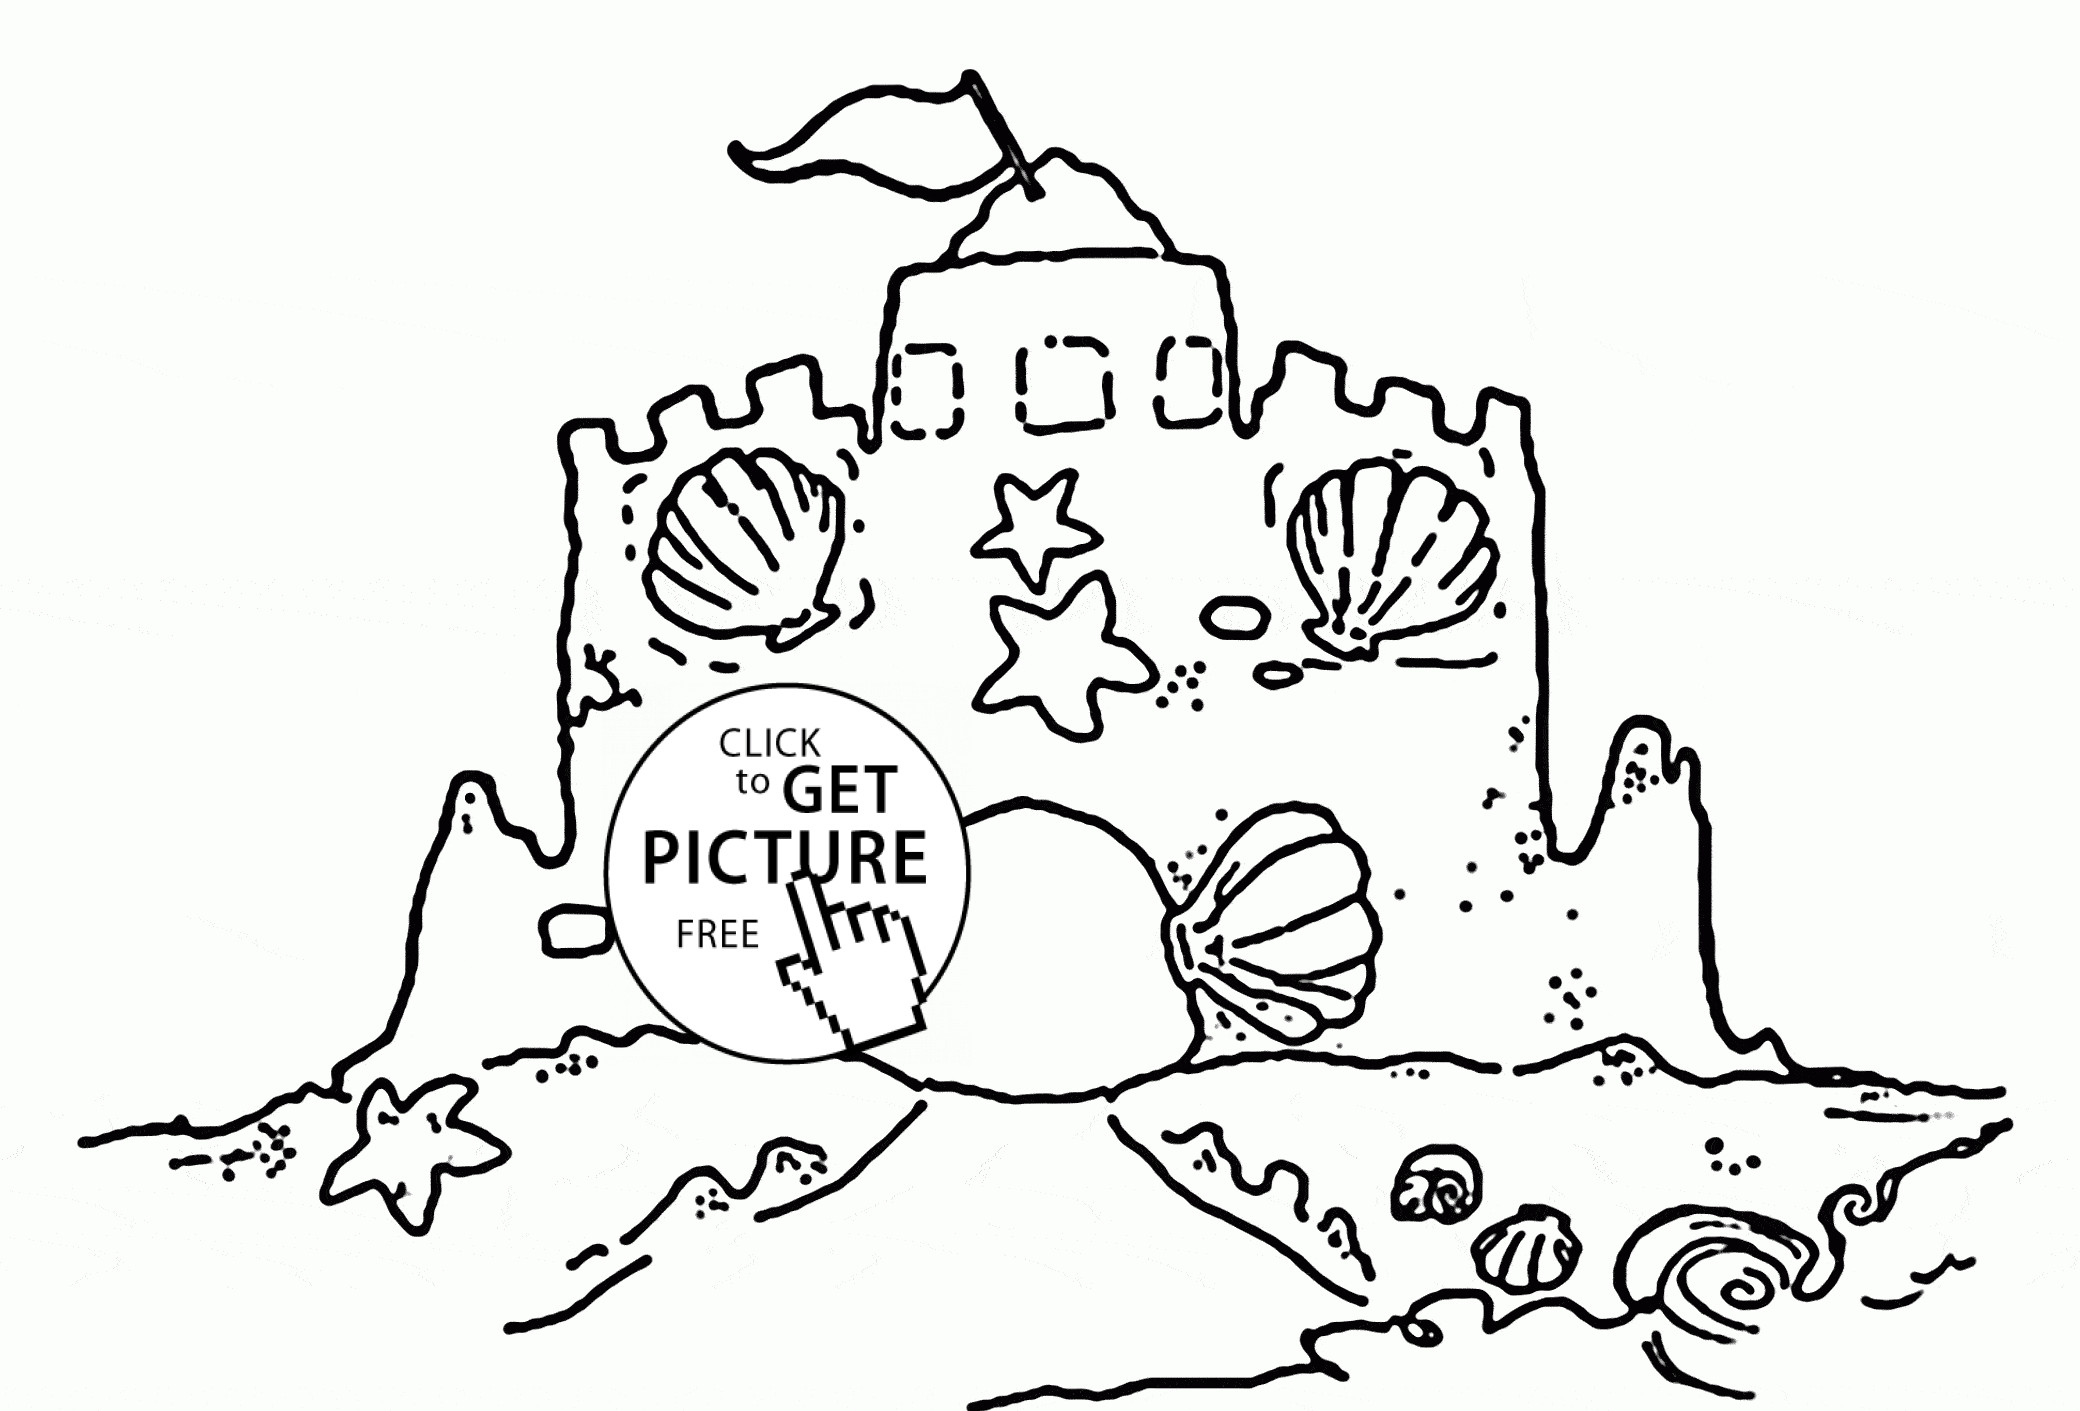 Sand Castle Coloring Pages
 Sand Castle with a Clamshell coloring page for kids